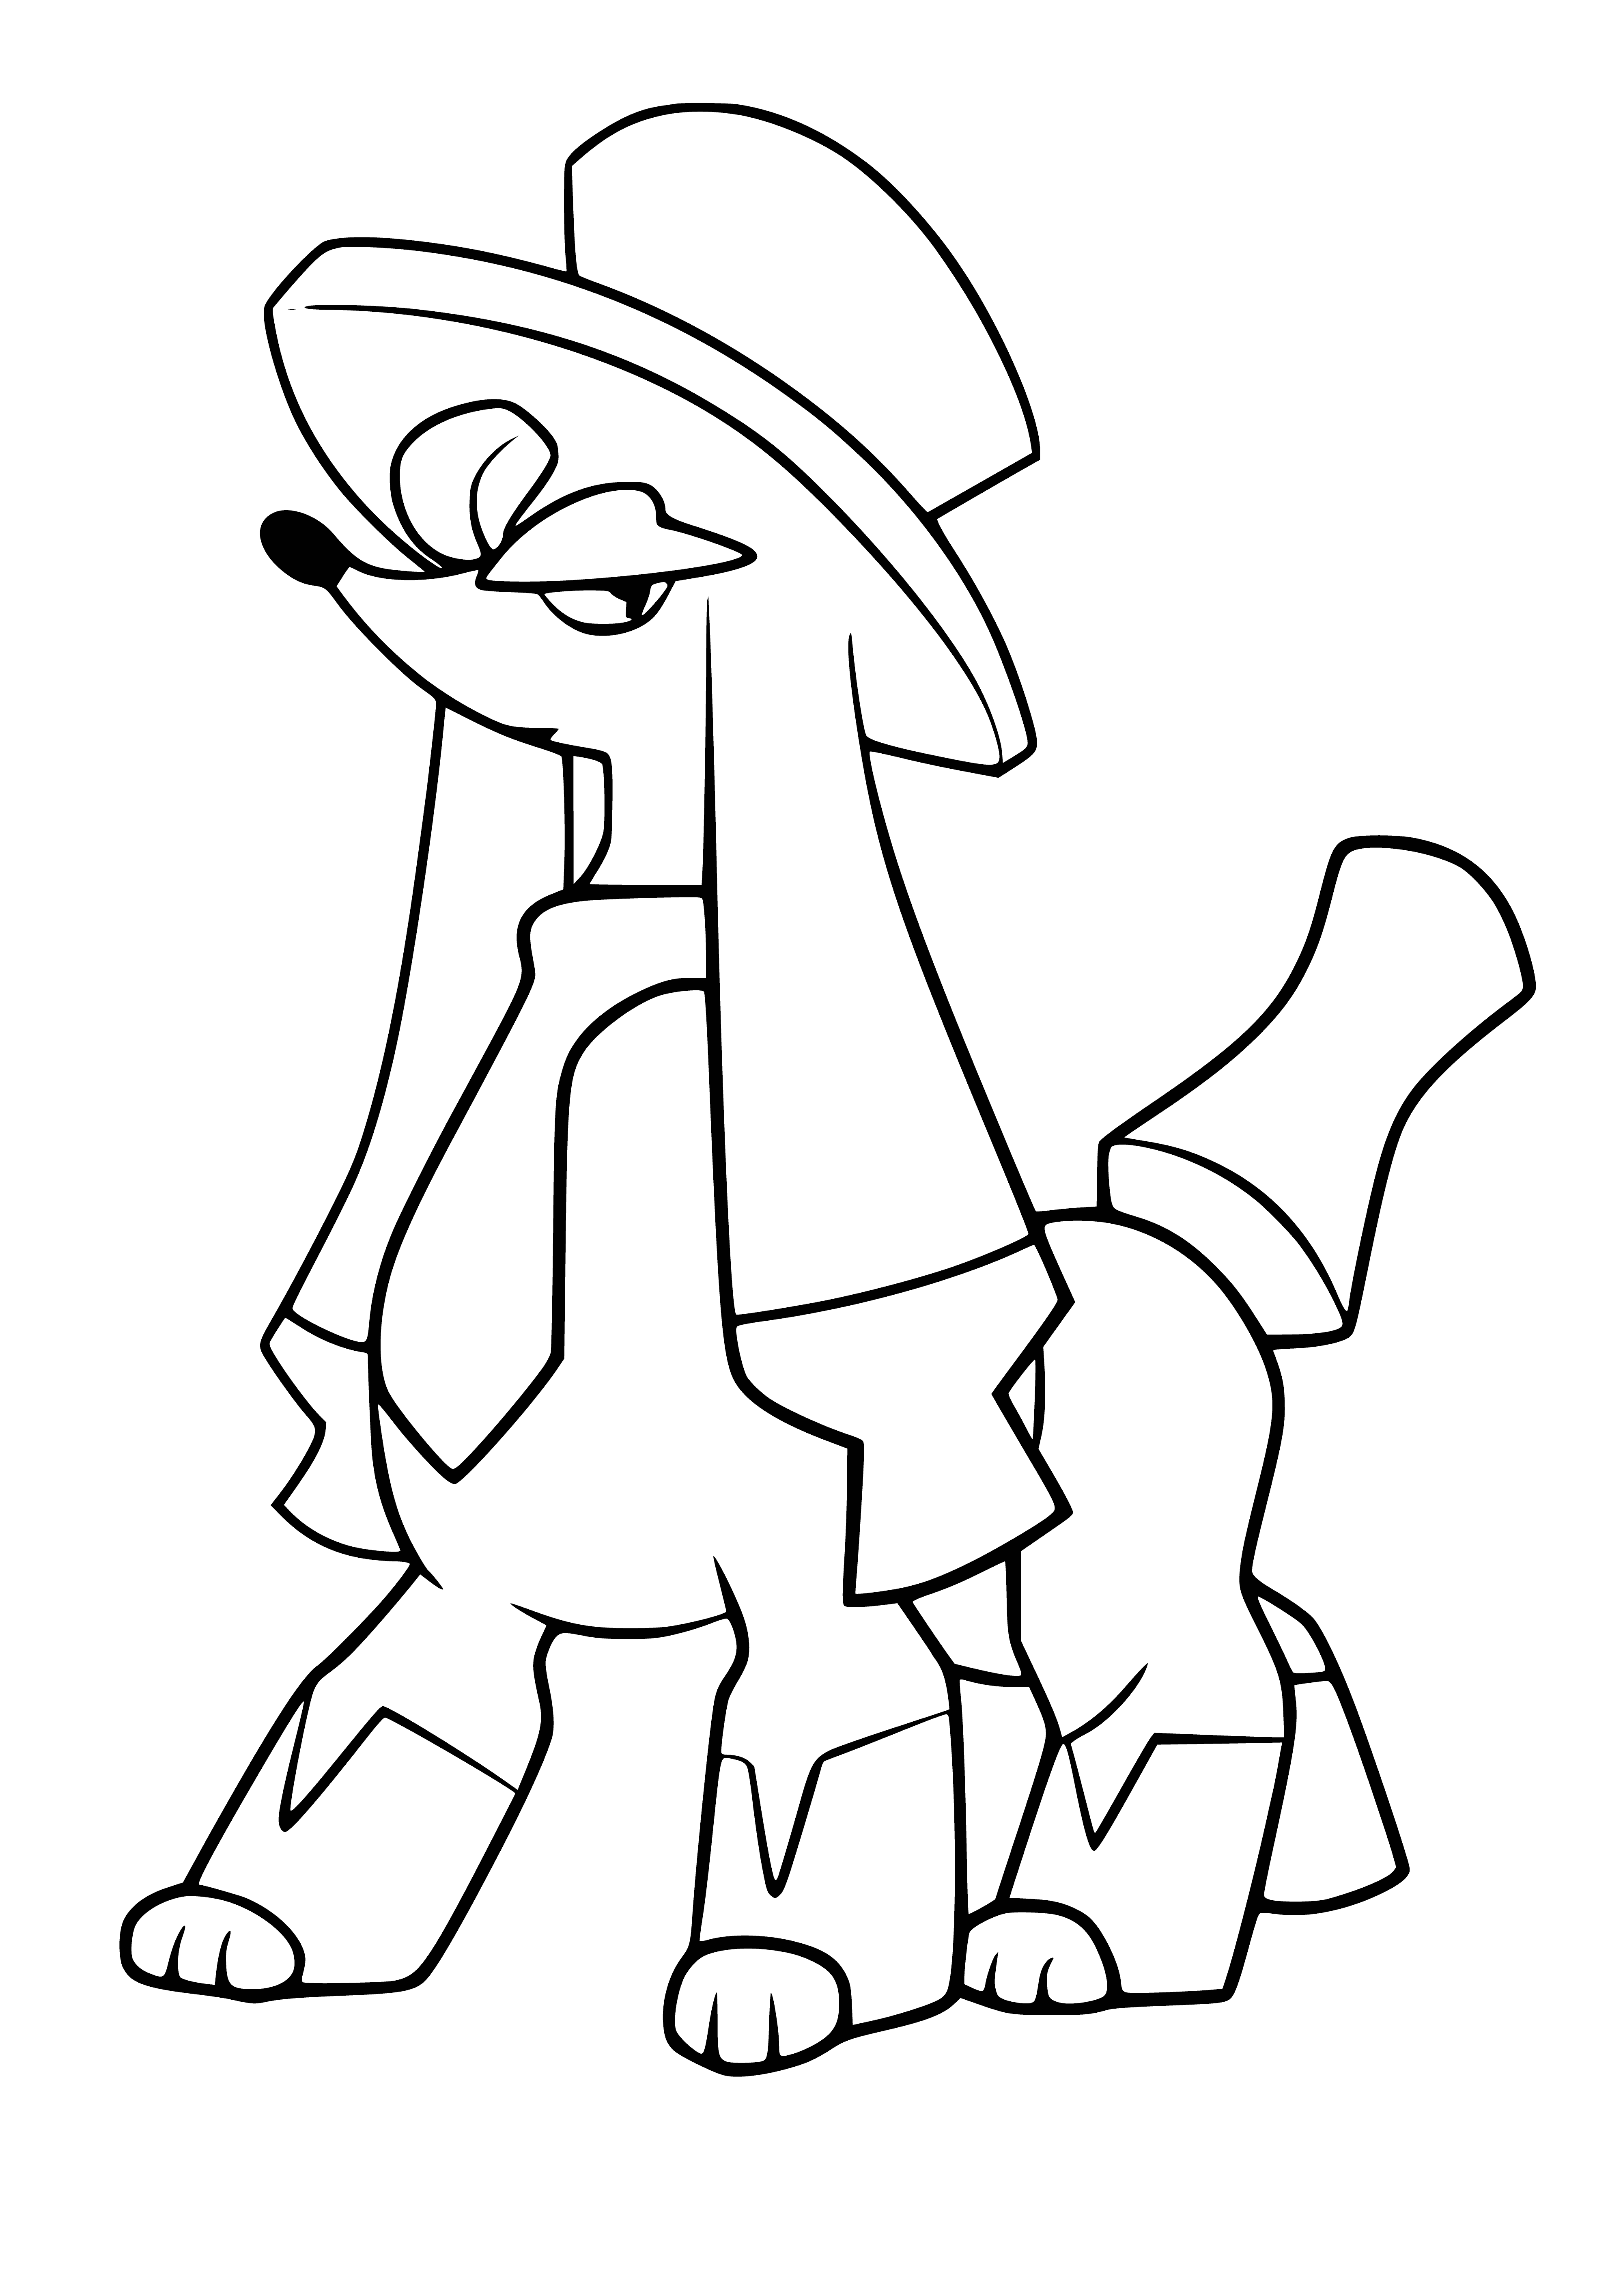 coloring page: Furfrou is a Normal-type Pokemon with thick, luxurious fur that can be groomed to change its appearance. Skilled trainers needed!